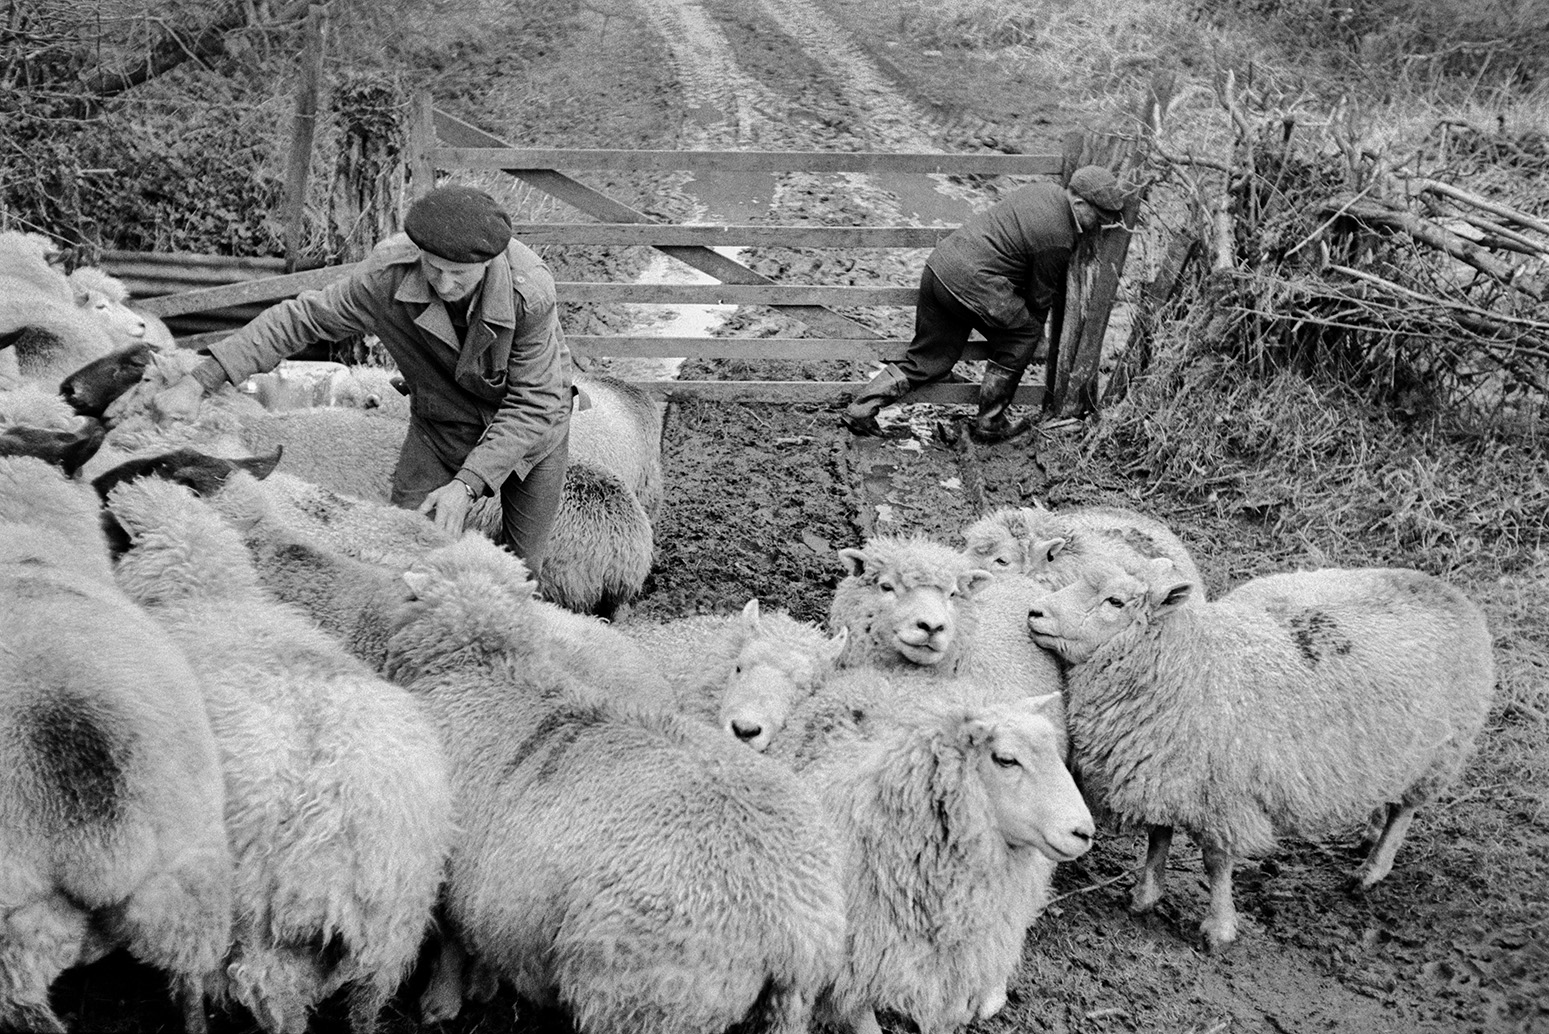 Ivor Bourne and another man separating pregnant sheep in a muddy field entrance by a wooden field gate at Mill Road Farm, Beaford. The farm was also known as Jeffrys.